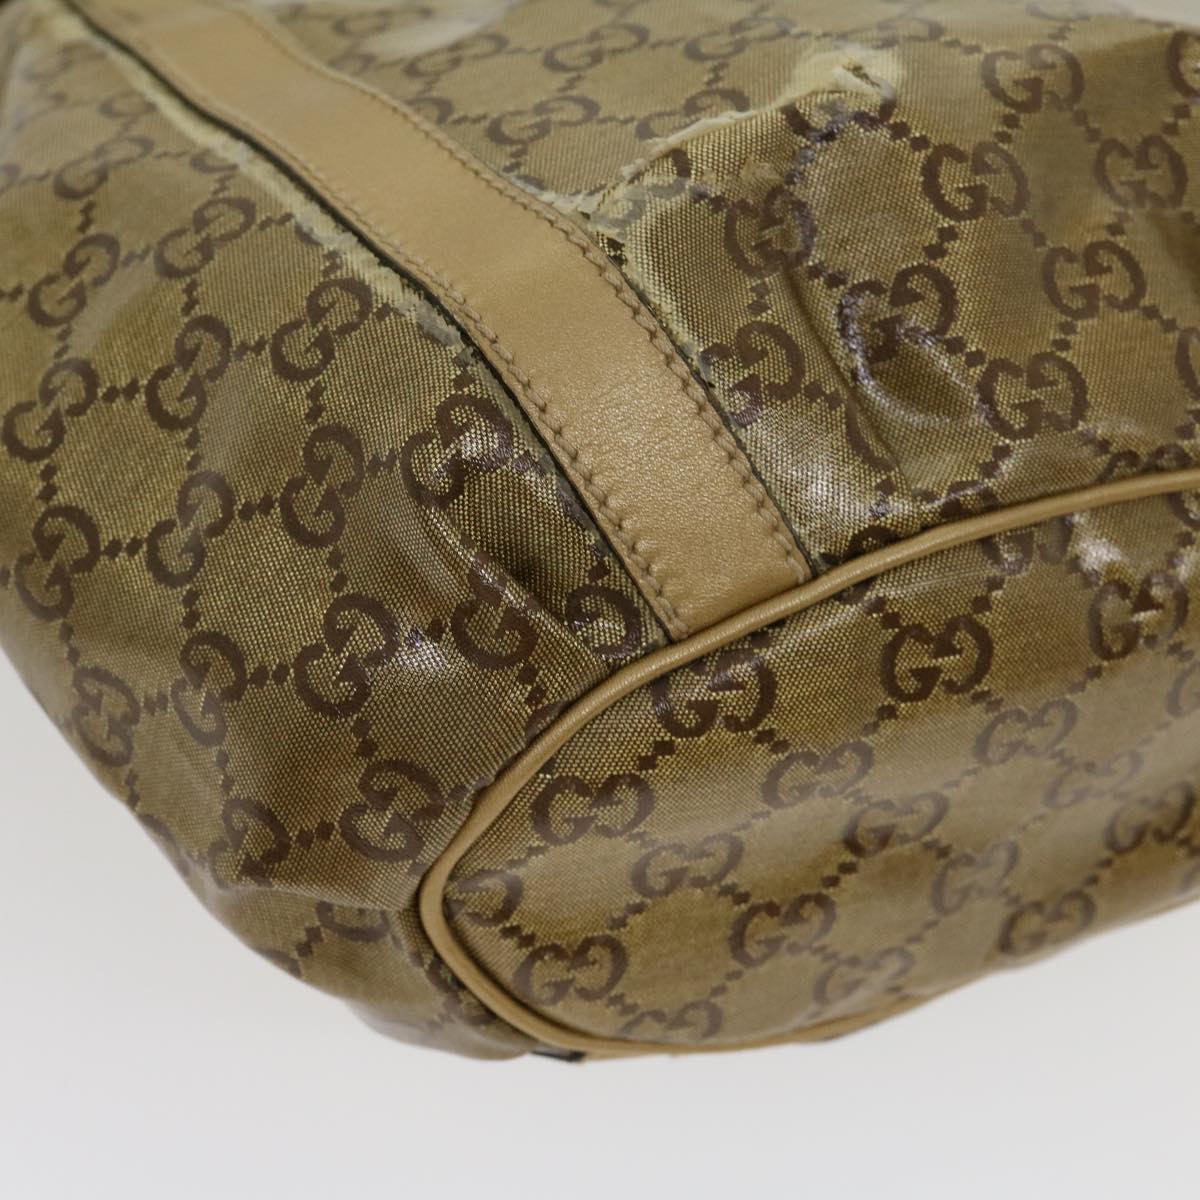 GUCCI GG Canvas Tote Bag Beige Gold 211983204991 Auth bs1798